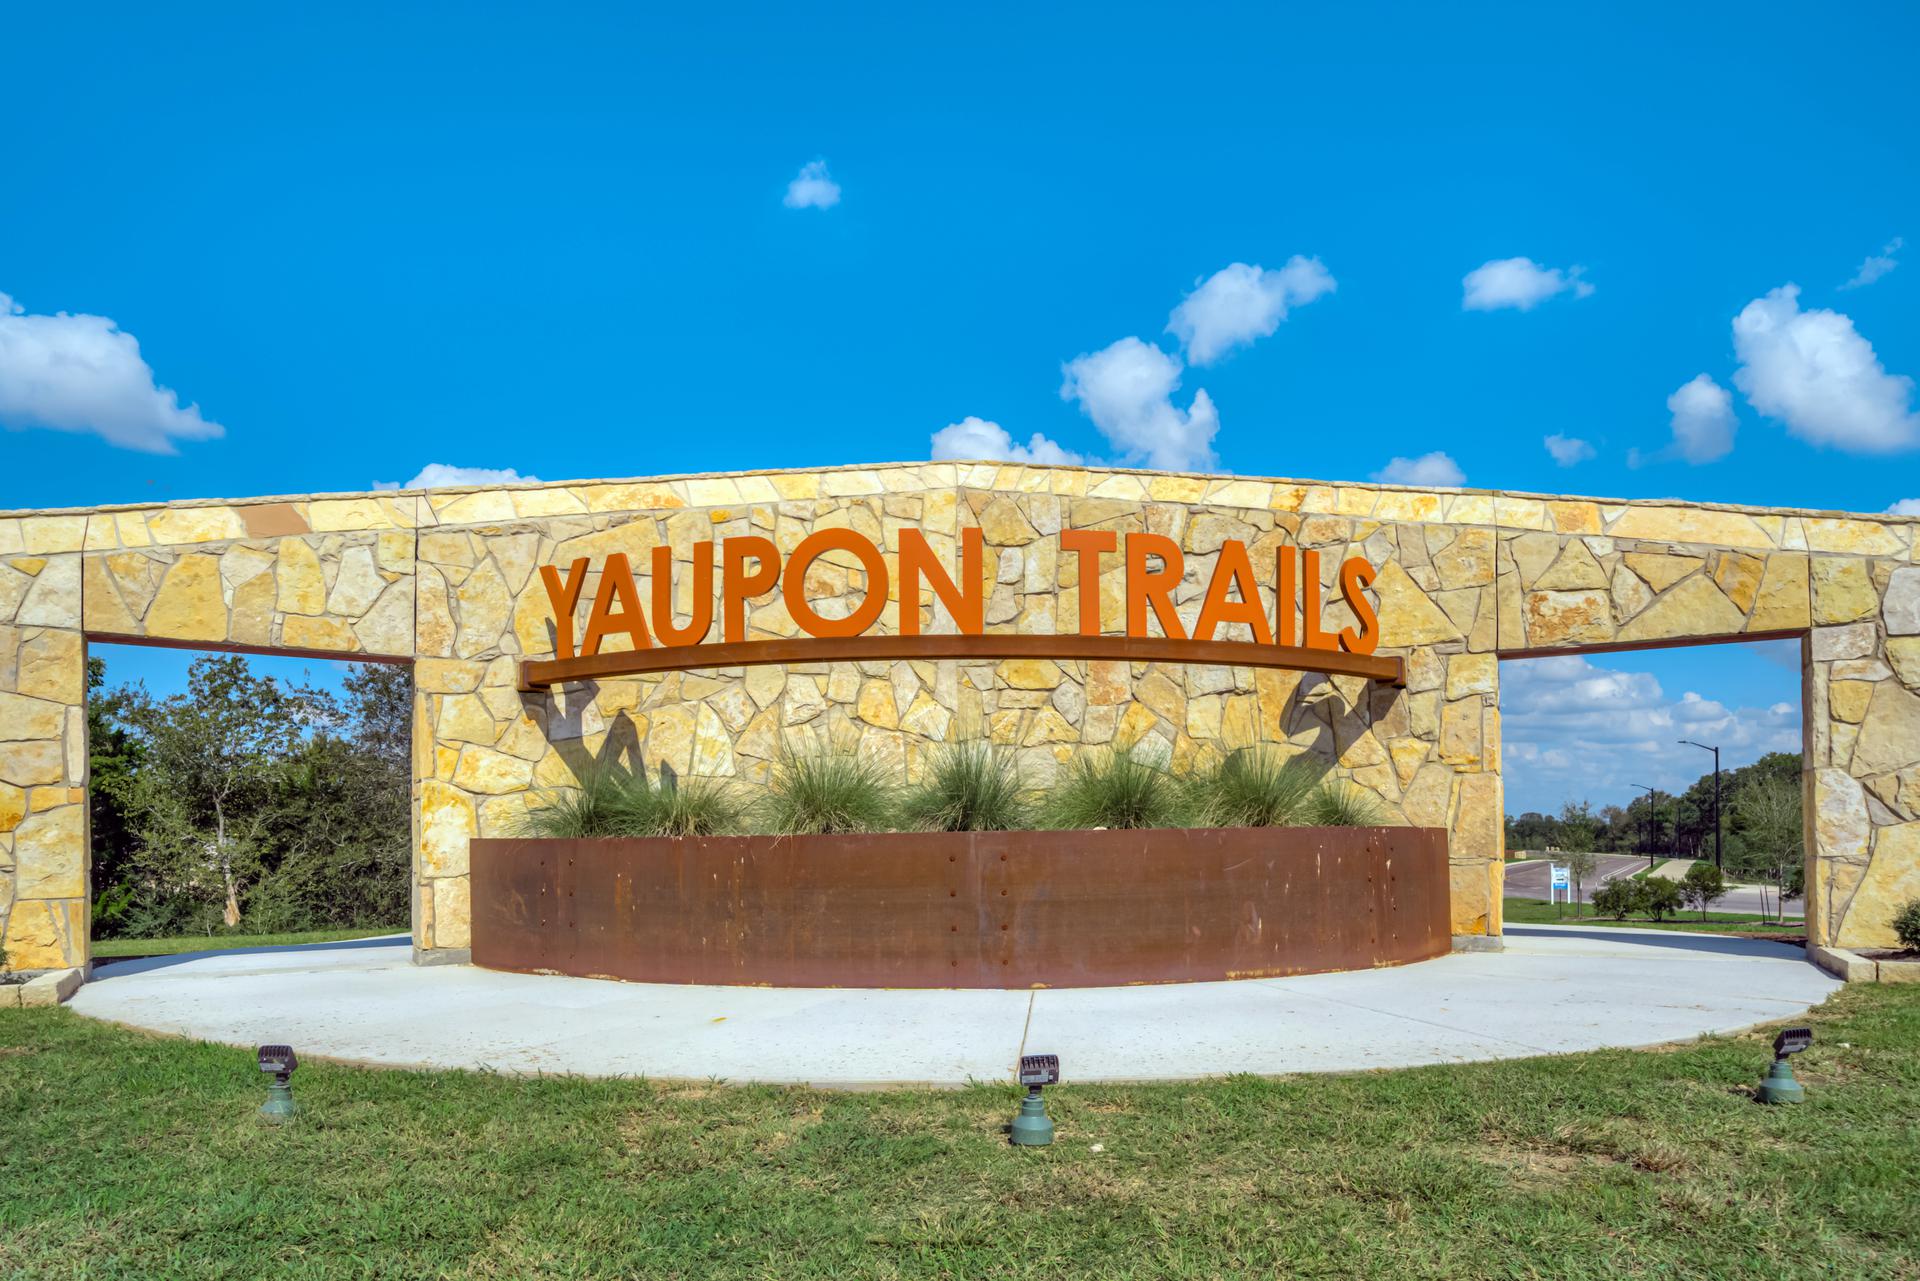 The Executive Collection at Yaupon Trails in Bryan, TX